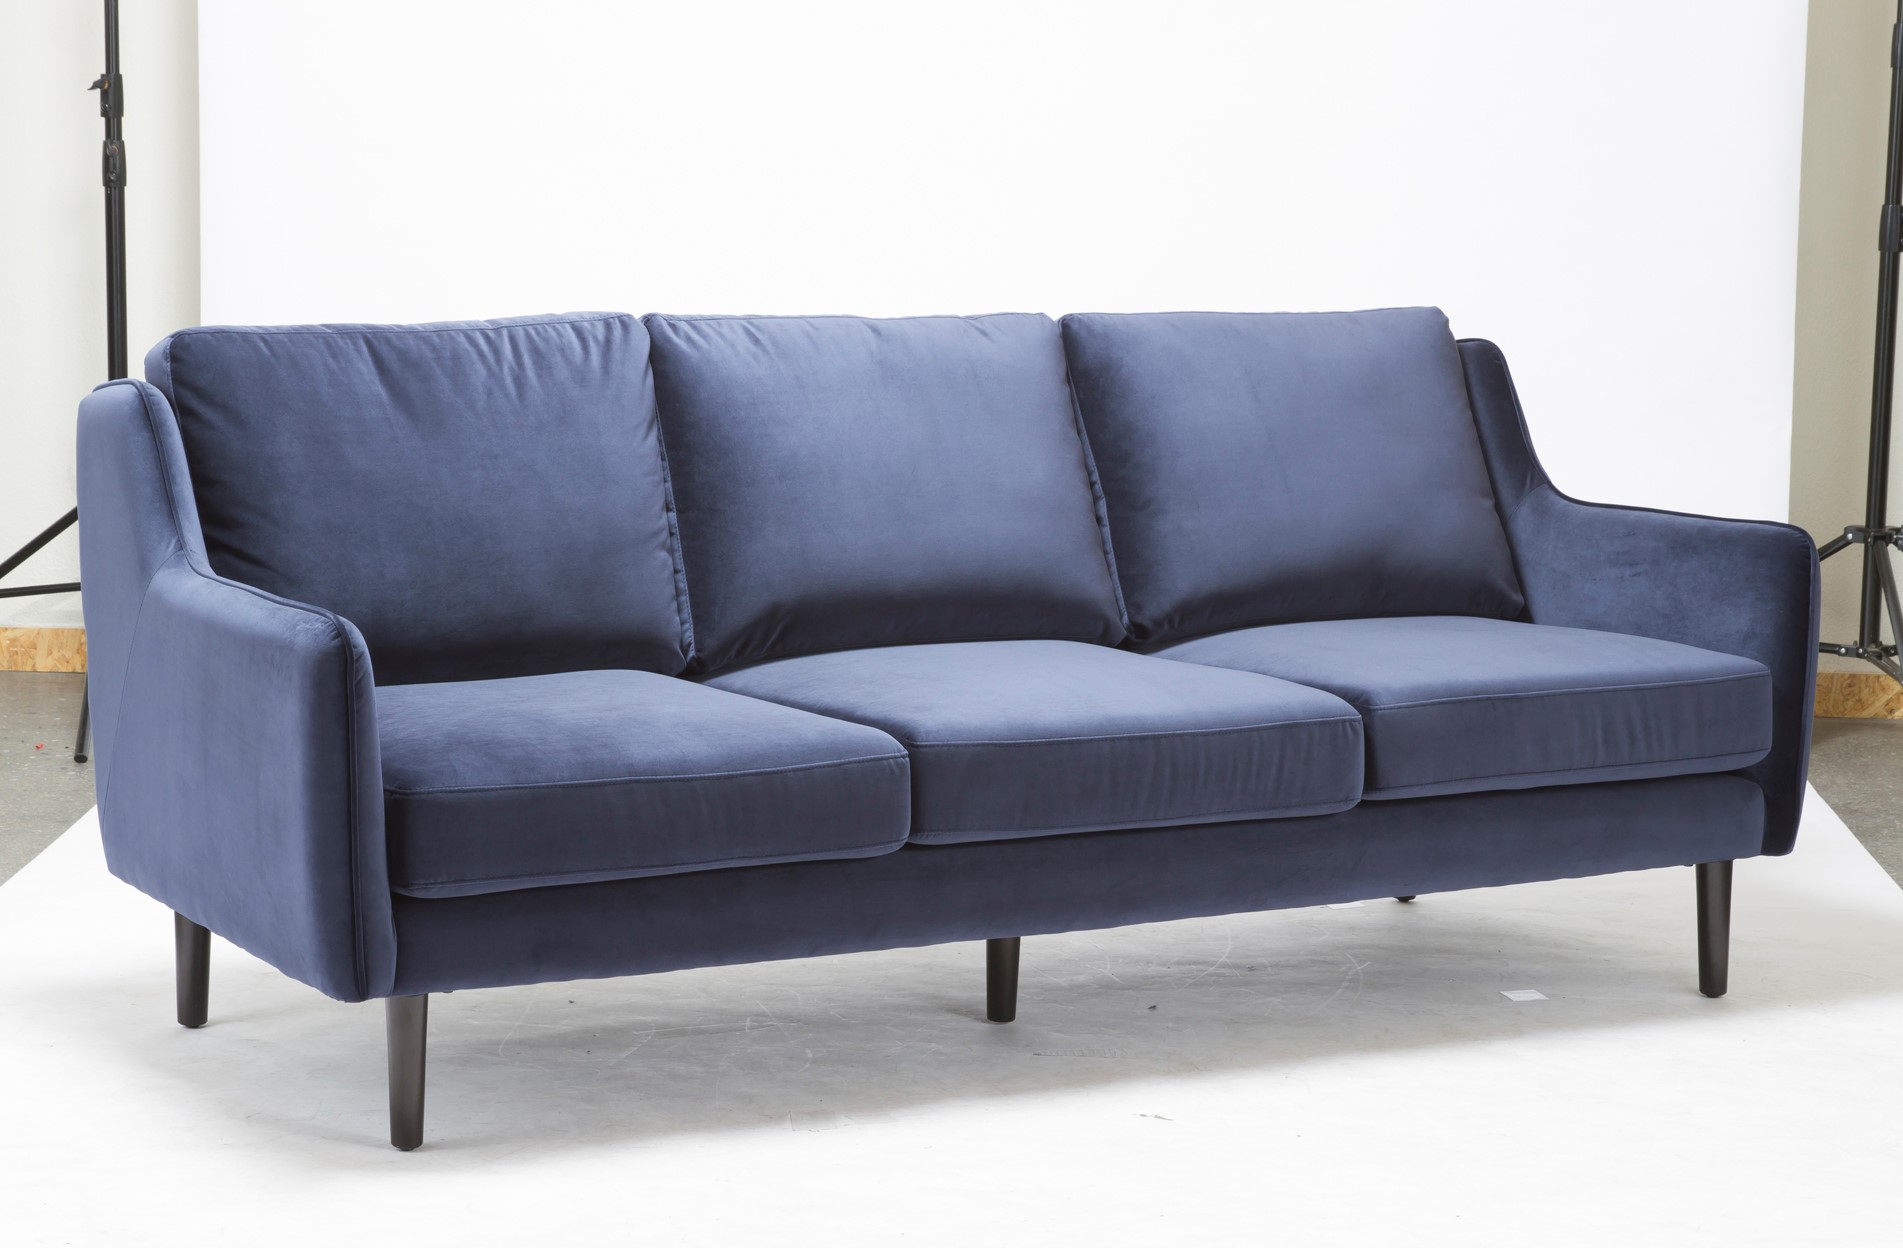 Mid-to-high-end sofa products occupy the mainstream at US$1,000~1999